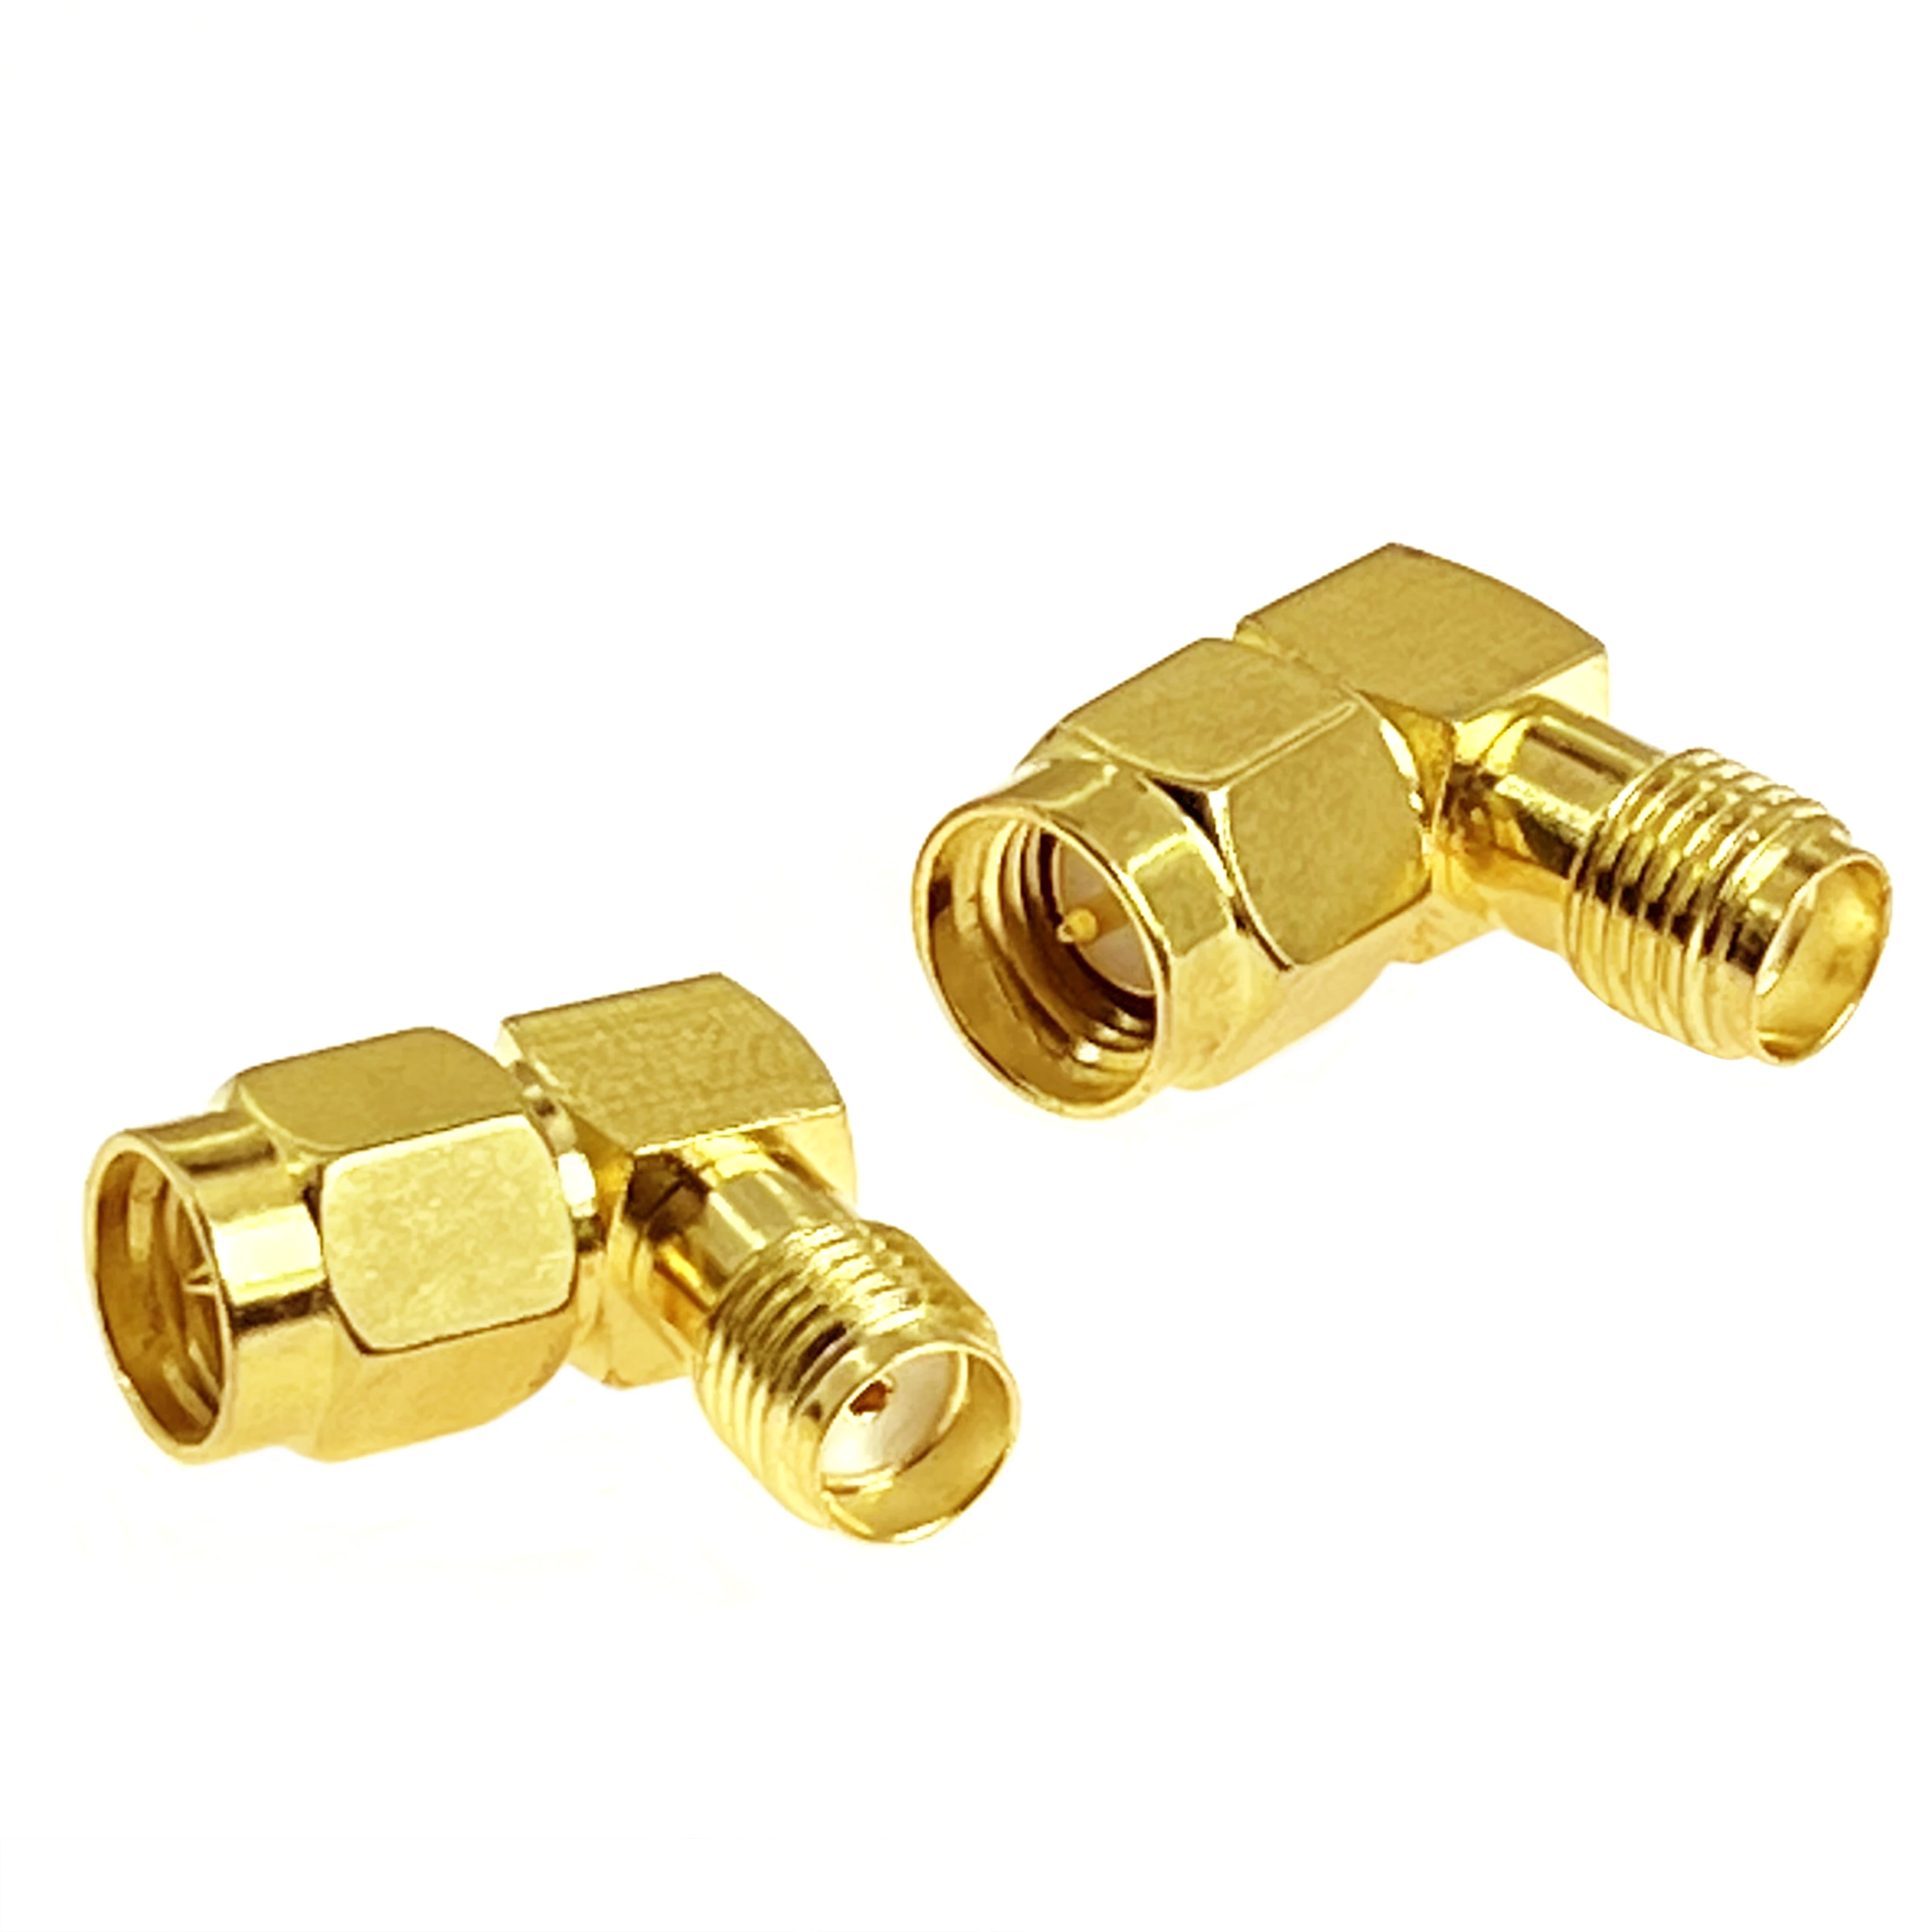 1pc SMA Male Plug Switch  Female Jack  RF Coax Adapter Convertor Right Angle 90-degree Goldplated New Wholesale